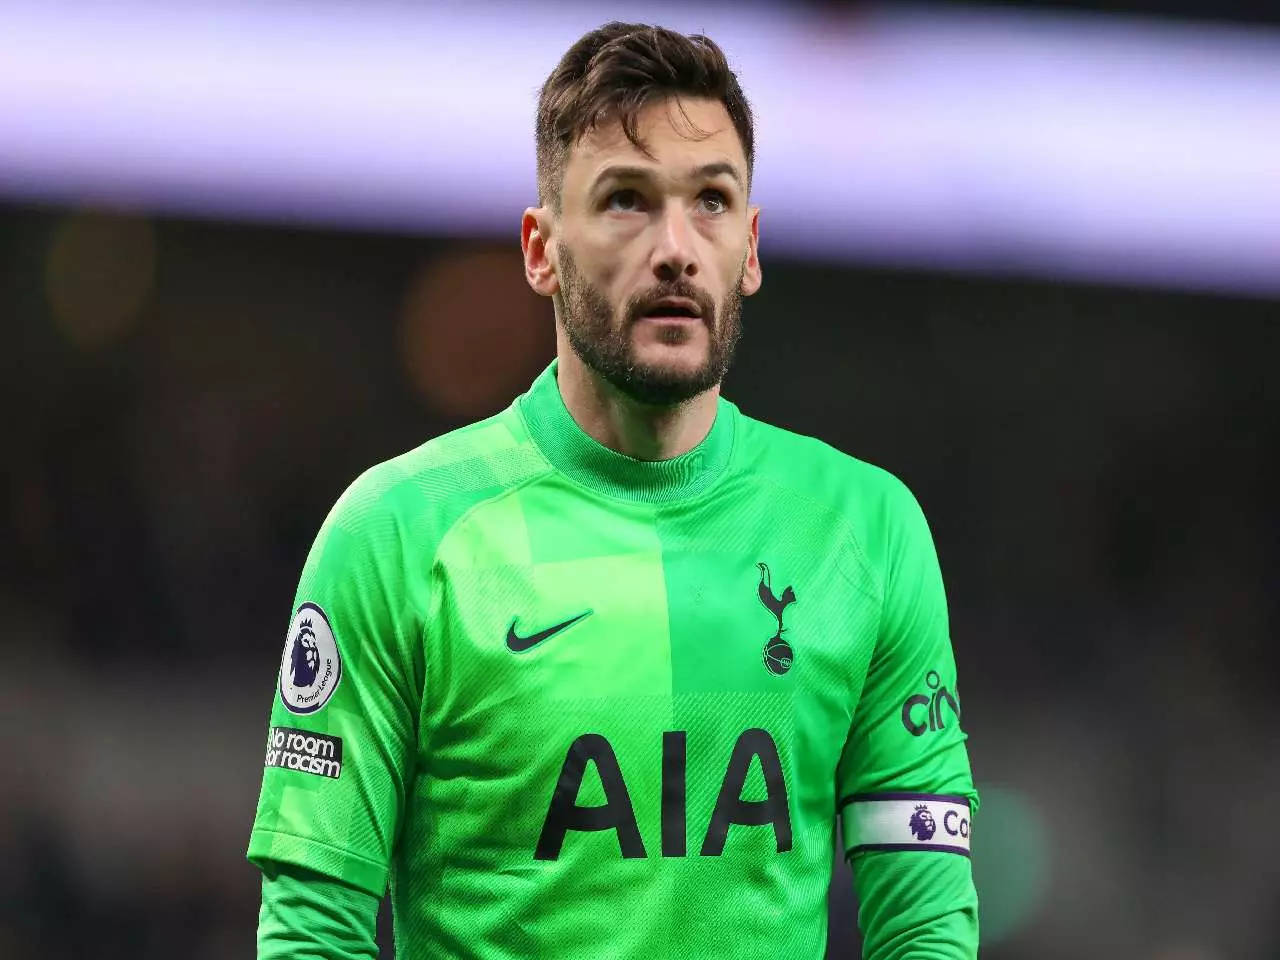 Caption: Hugo Lloris In Action With His Green Jersey Background